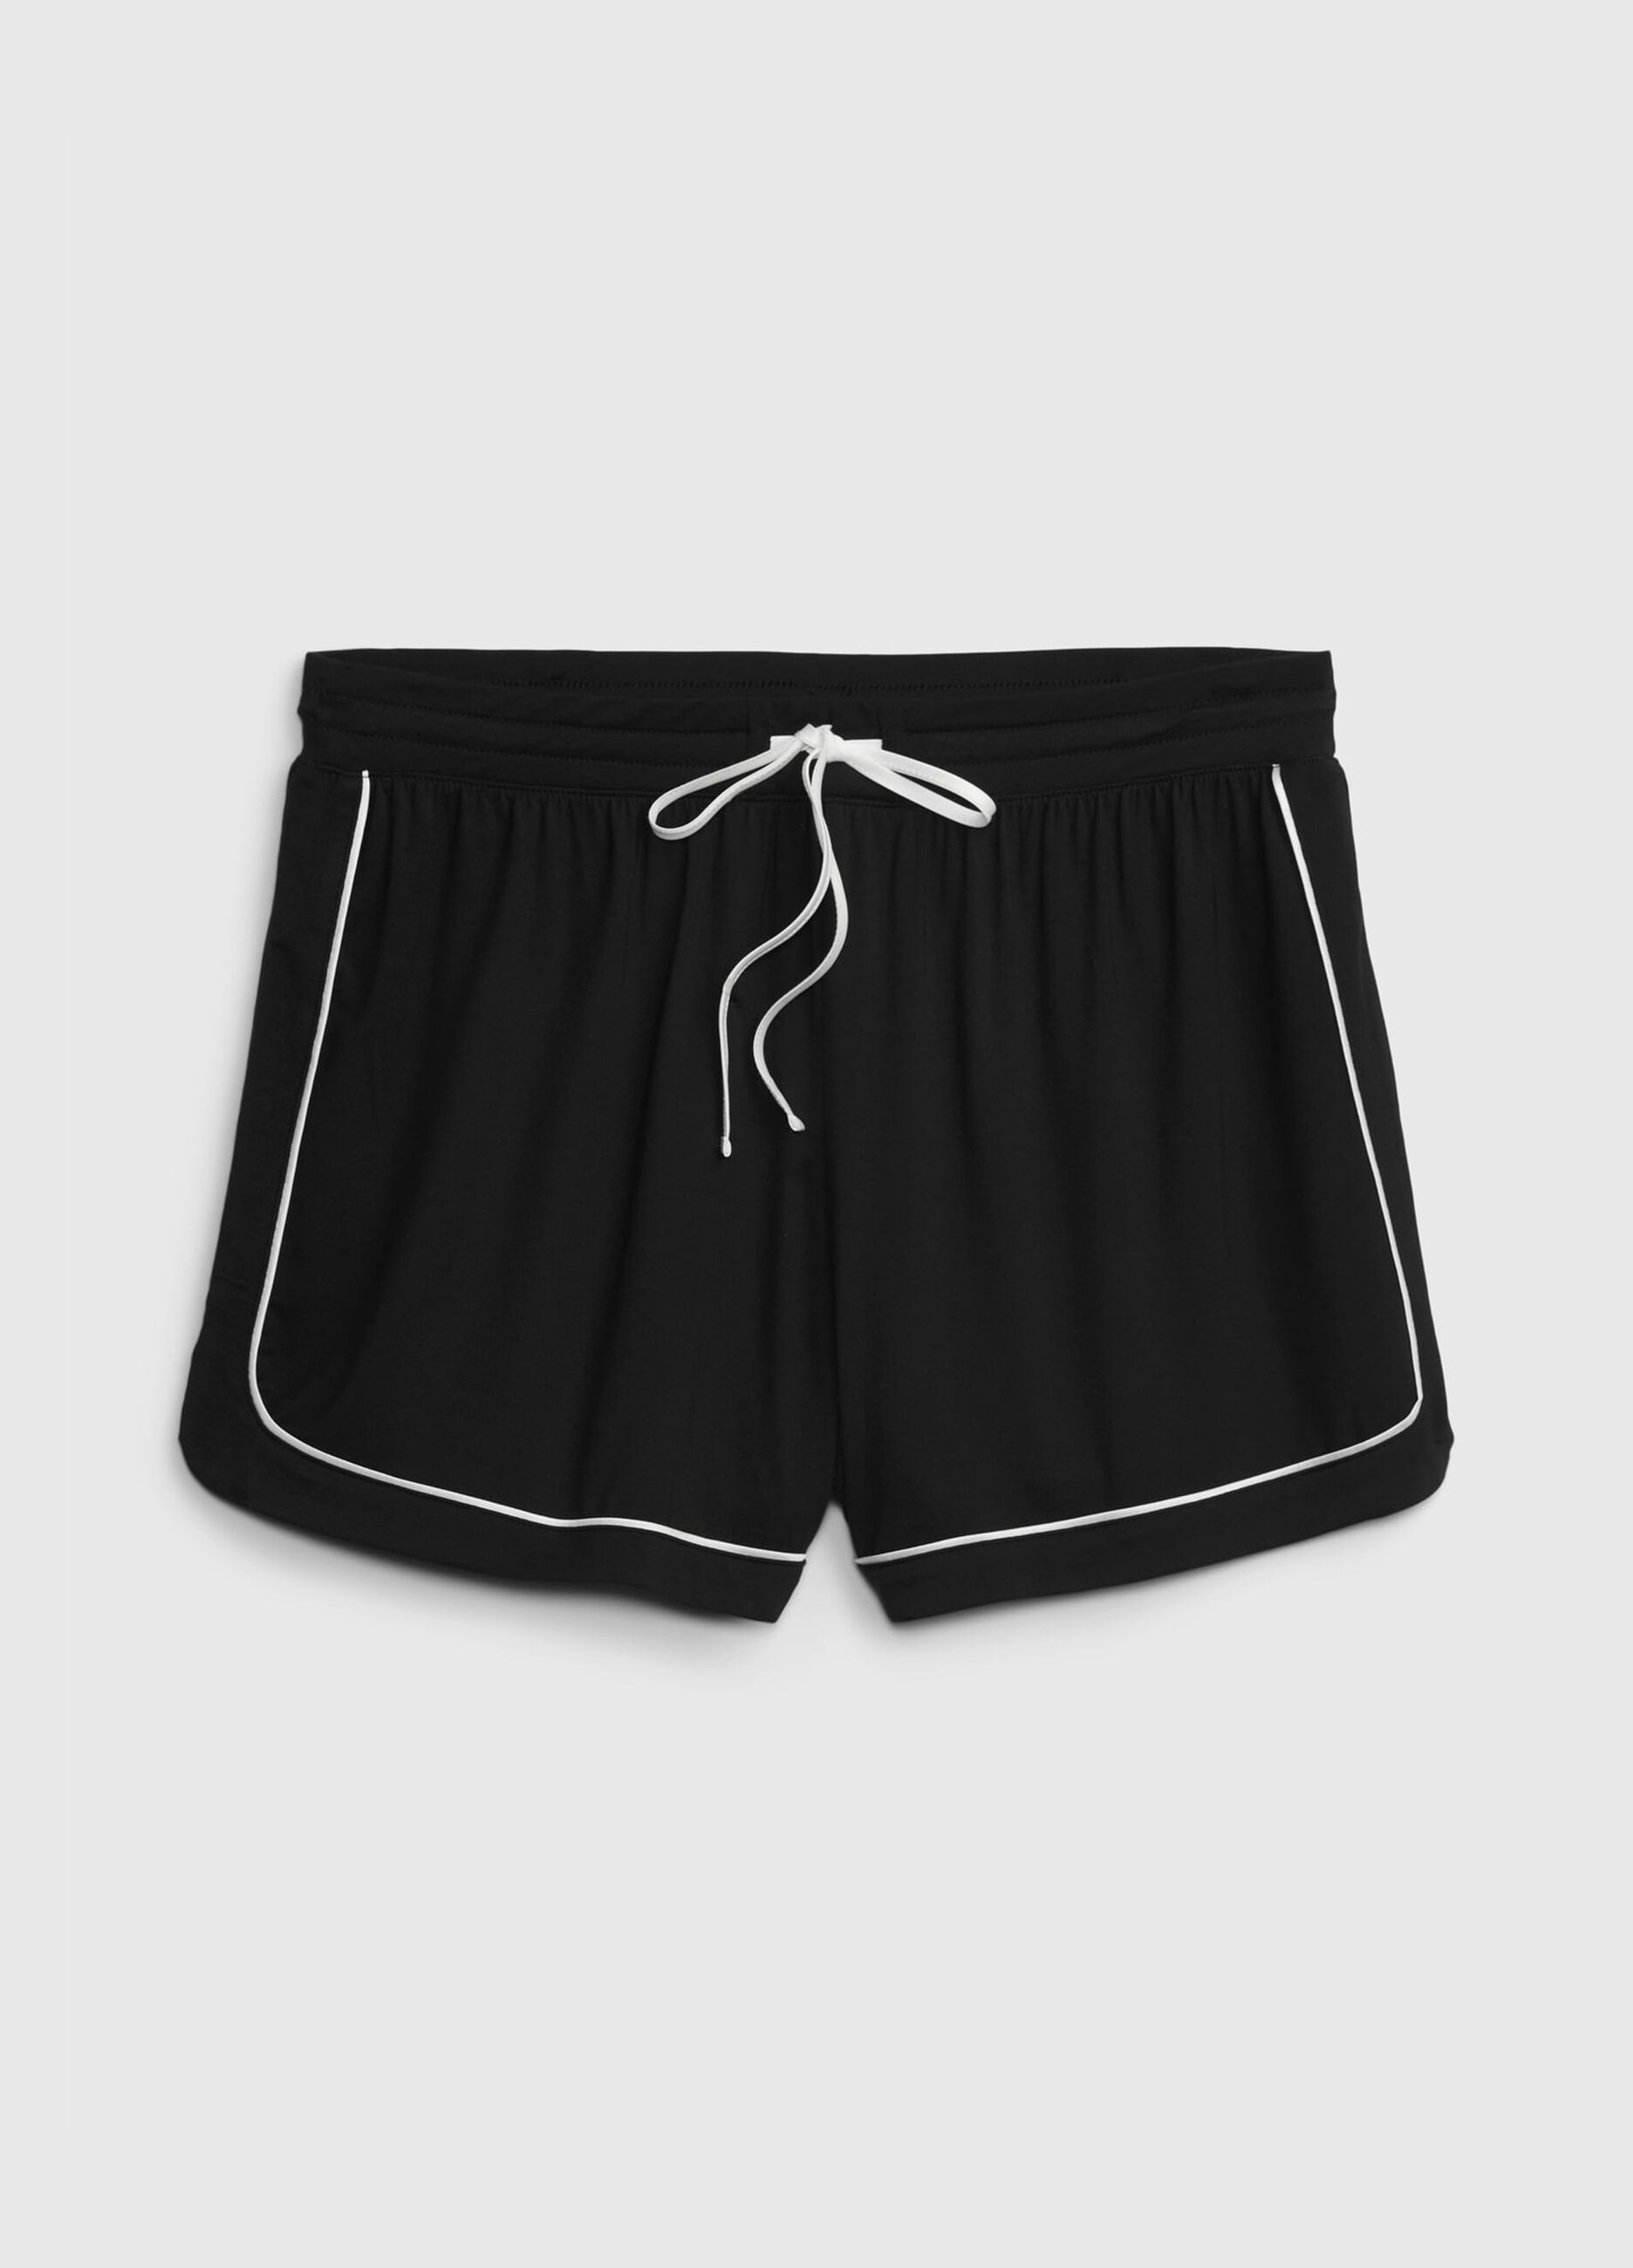 Pyjama shorts with contrasting piping